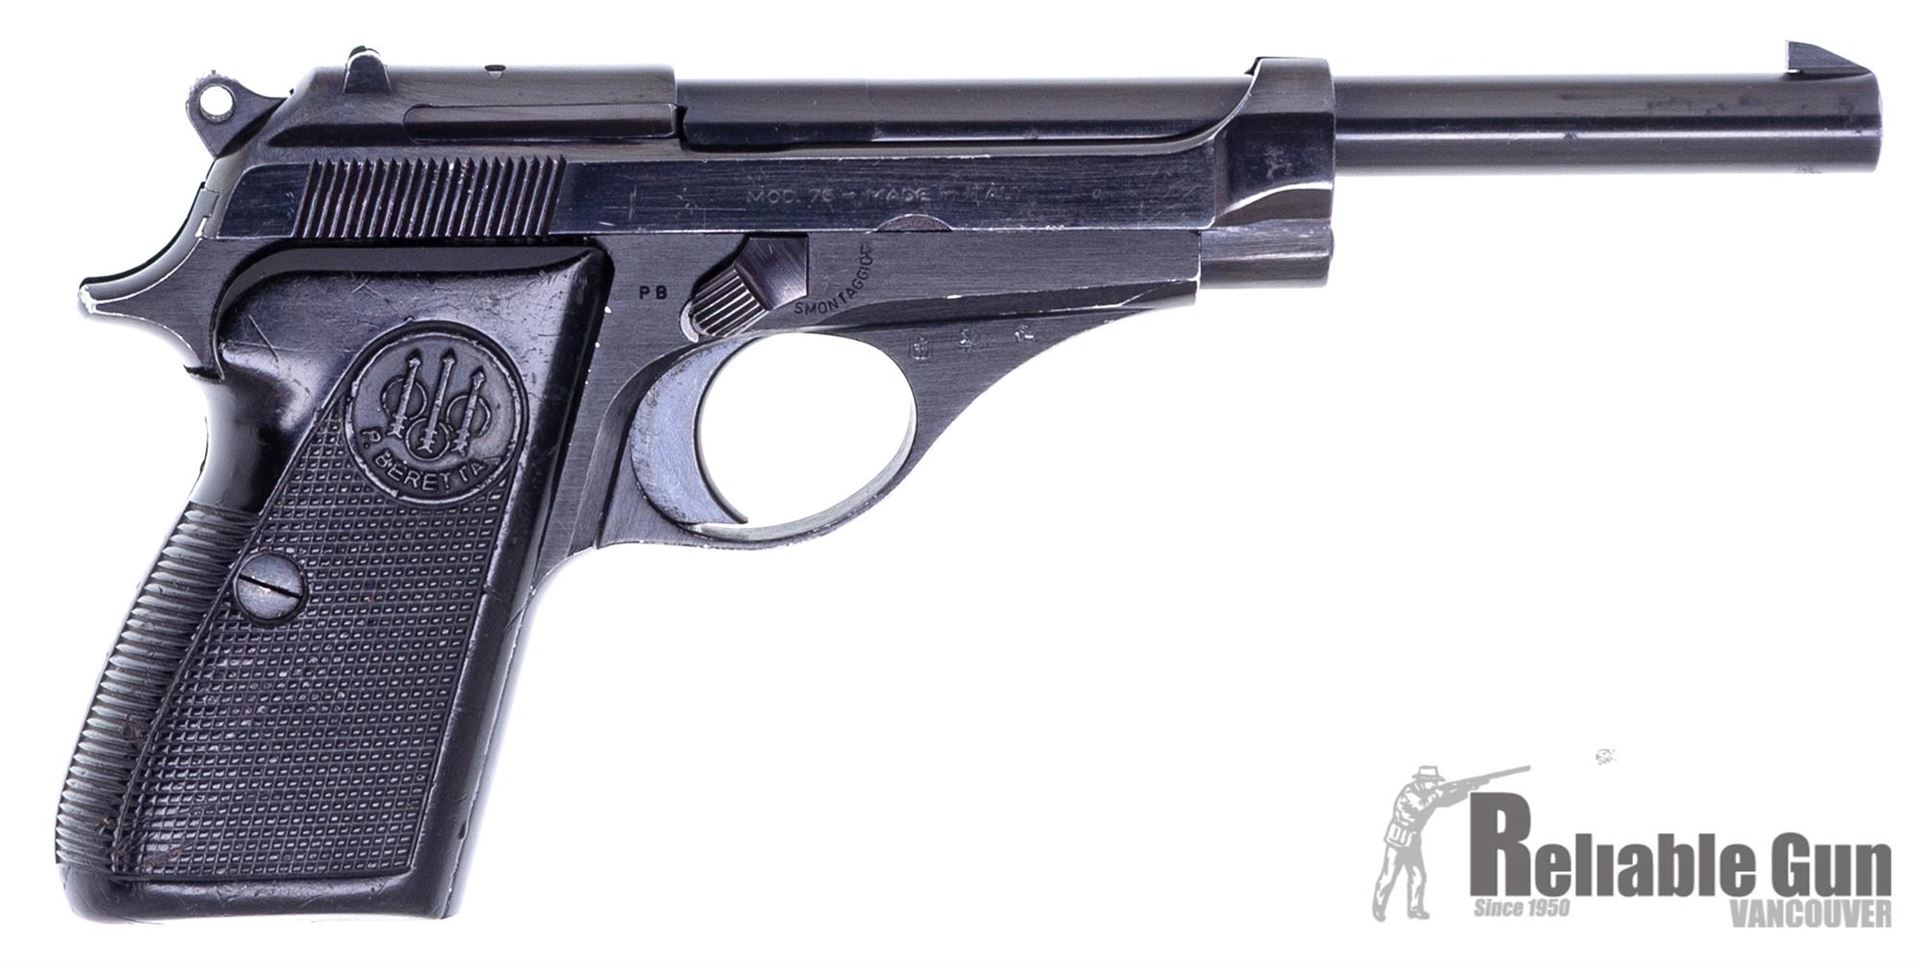 reliable-gun-vancouver-3227-fraser-street-vancouver-bc-canada-used